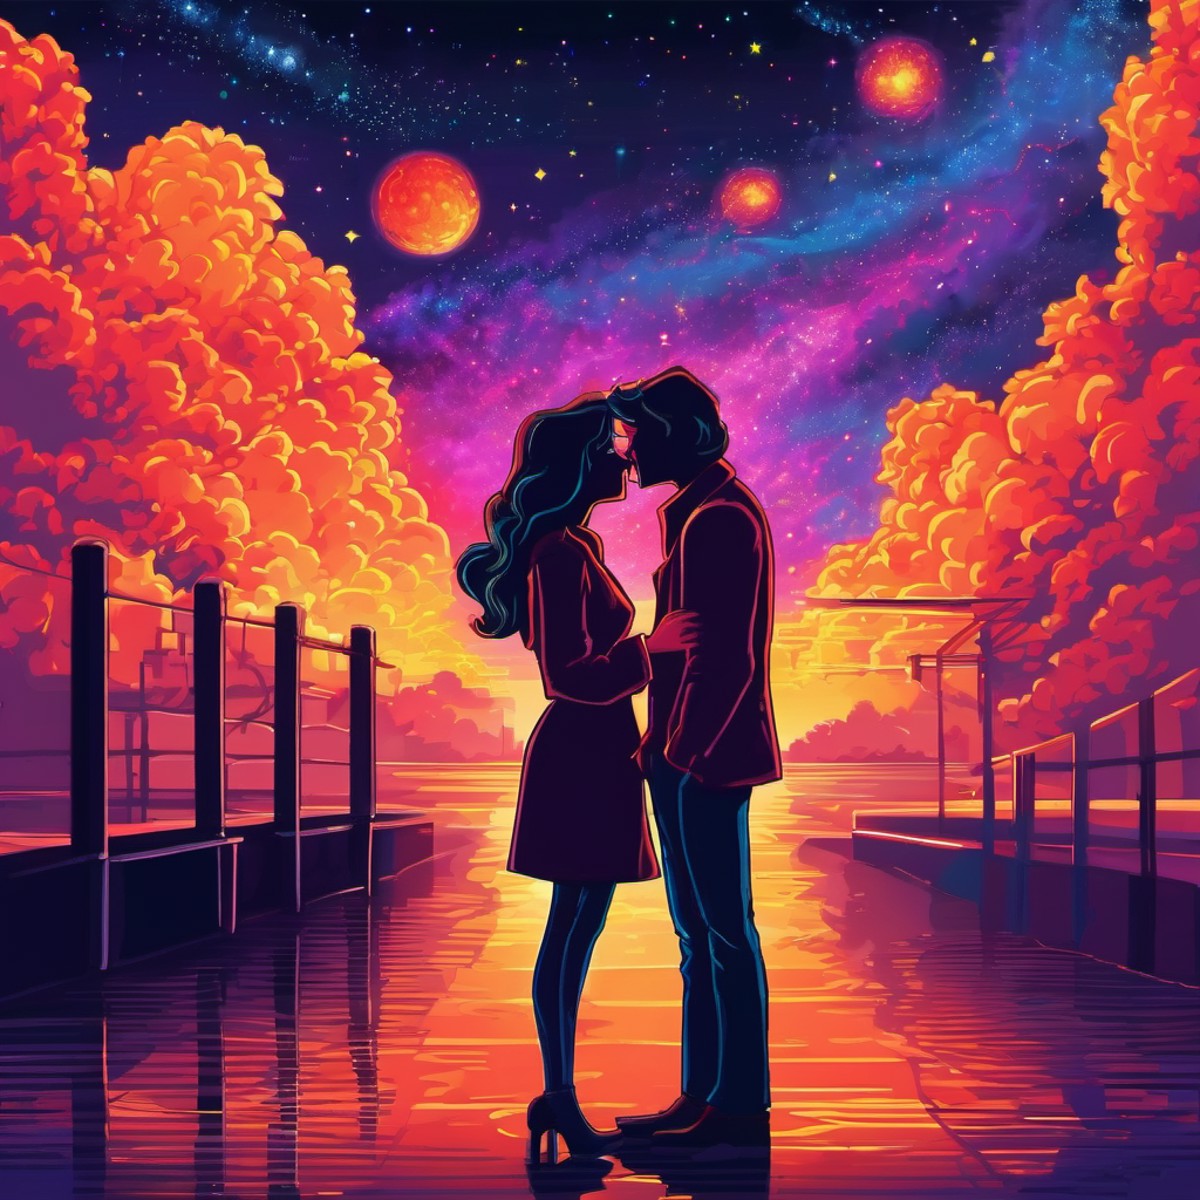 Retro game art side view of two a man and woman kissing in a glowing galaxy fire . 16-bit, vibrant colors, pixelated, nost...